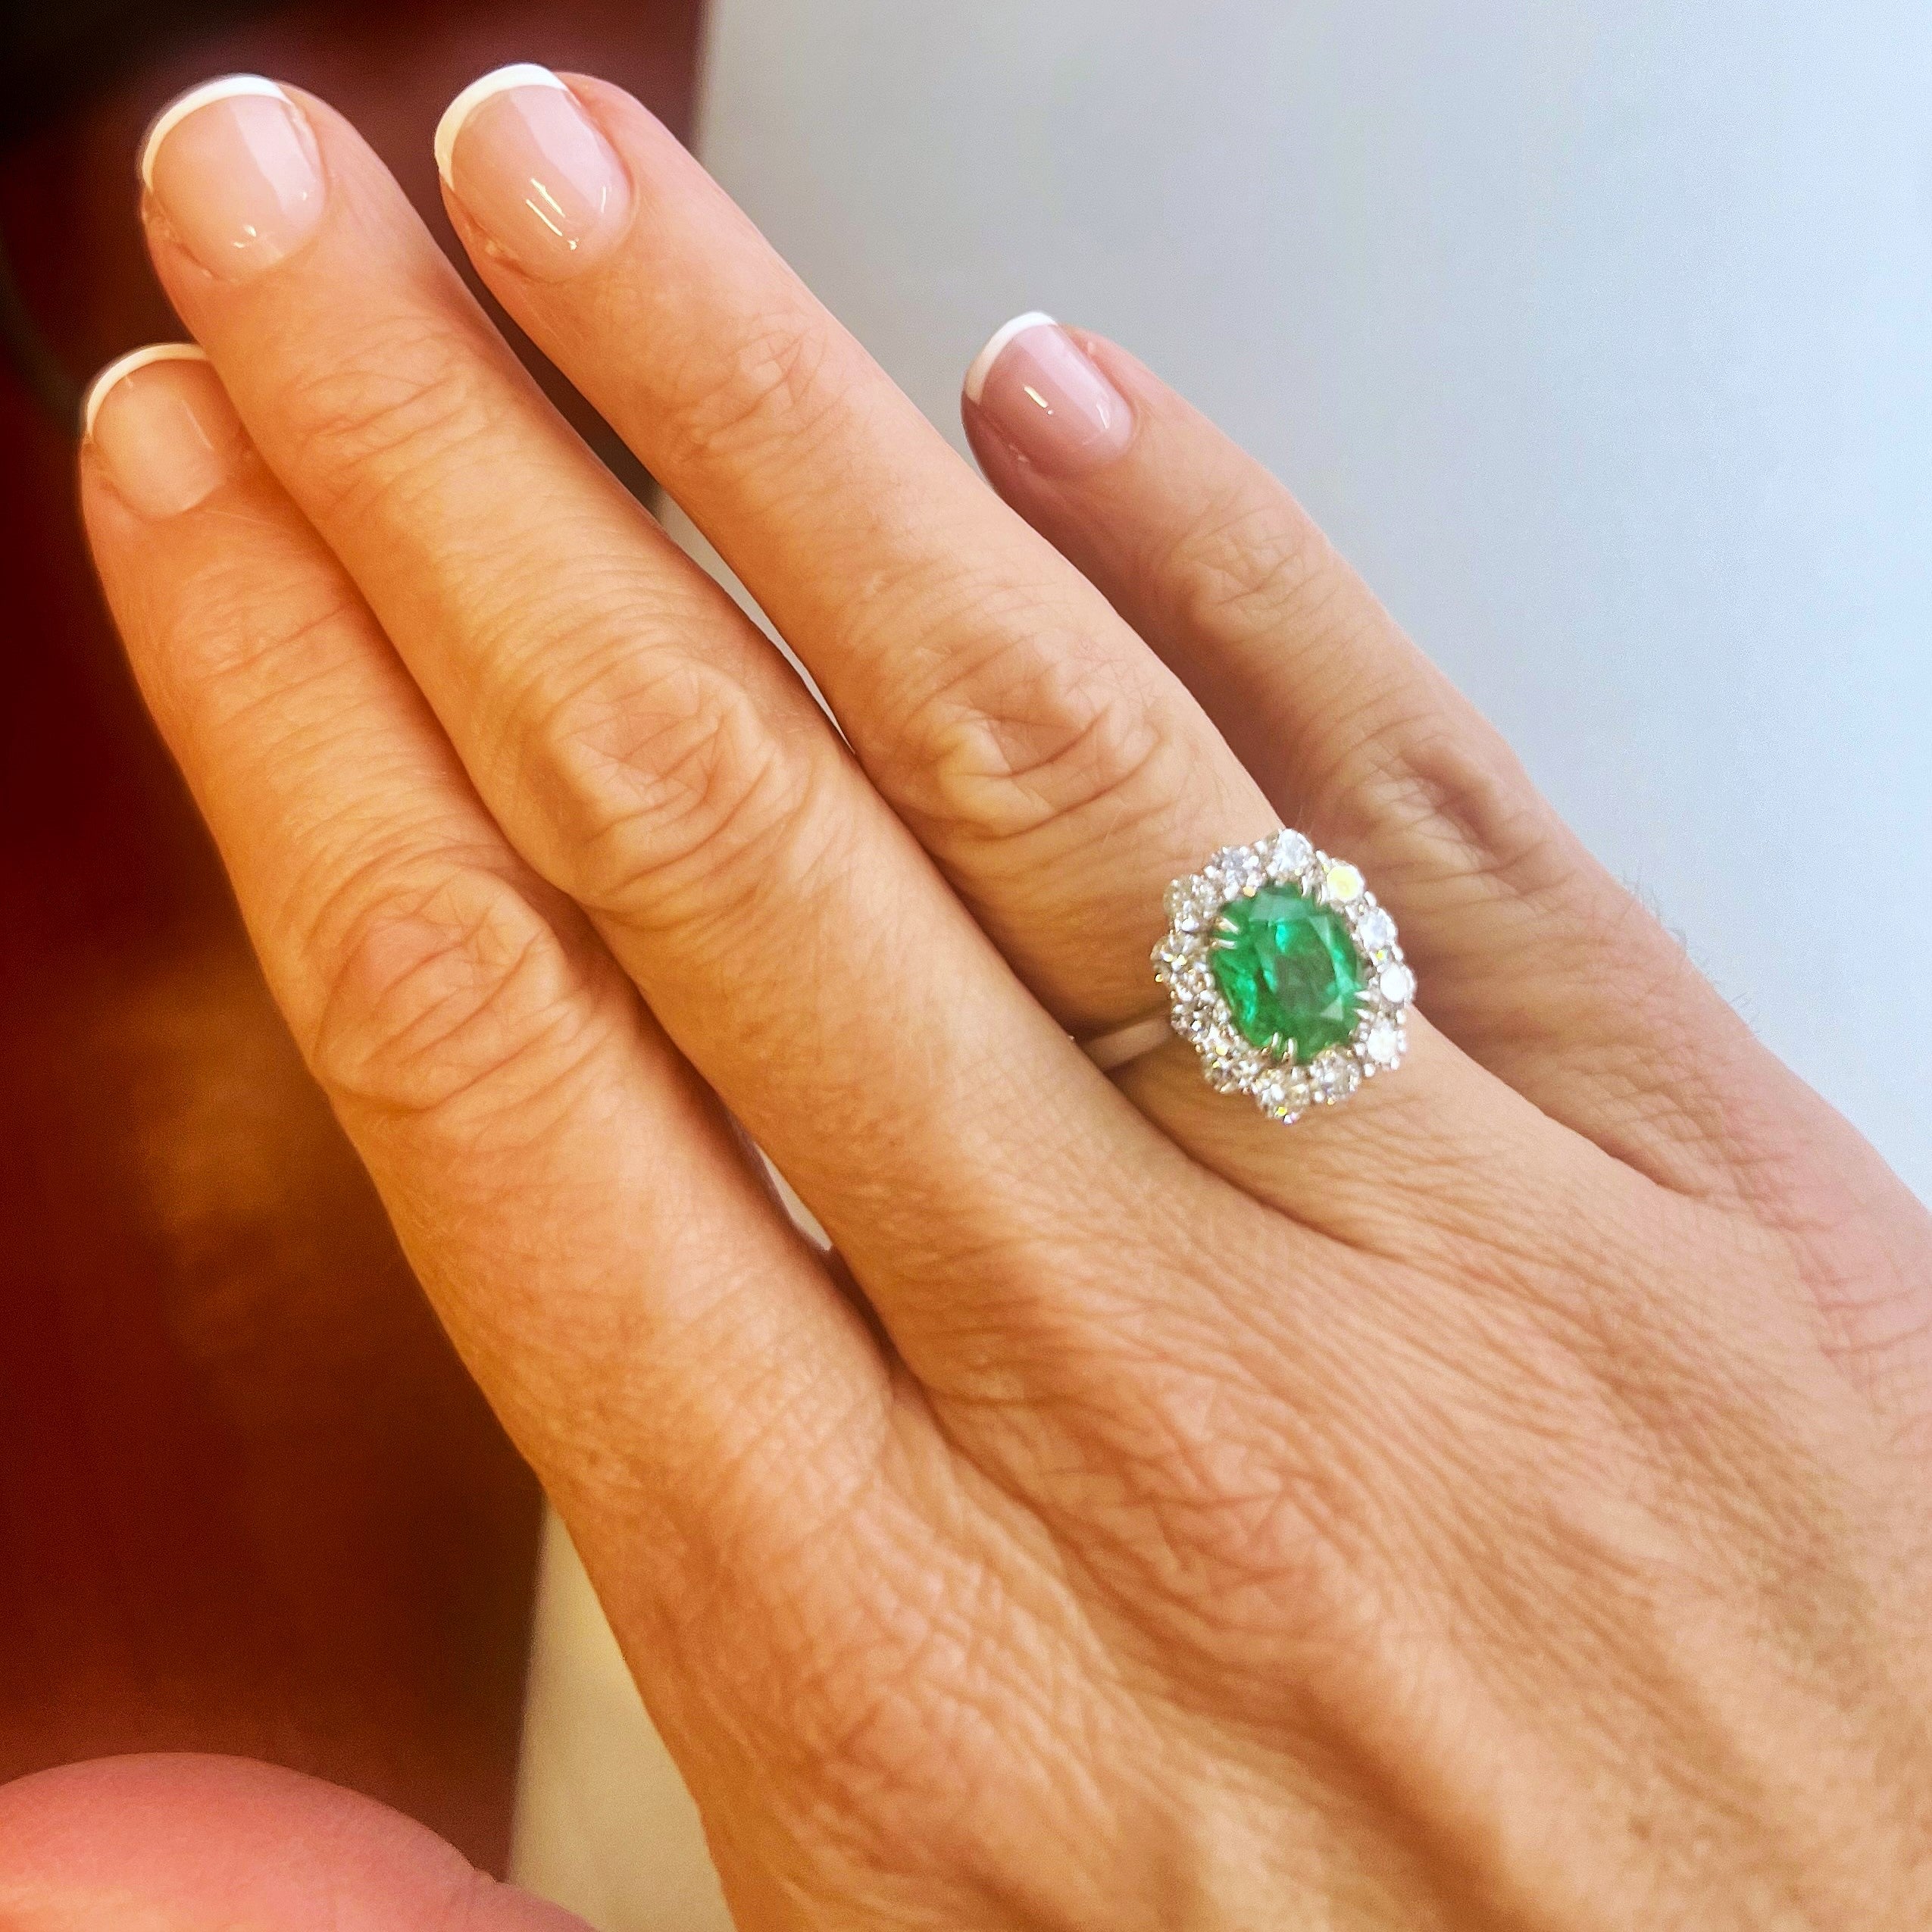 Michelle's Journey to the Perfect Anniversary Ring